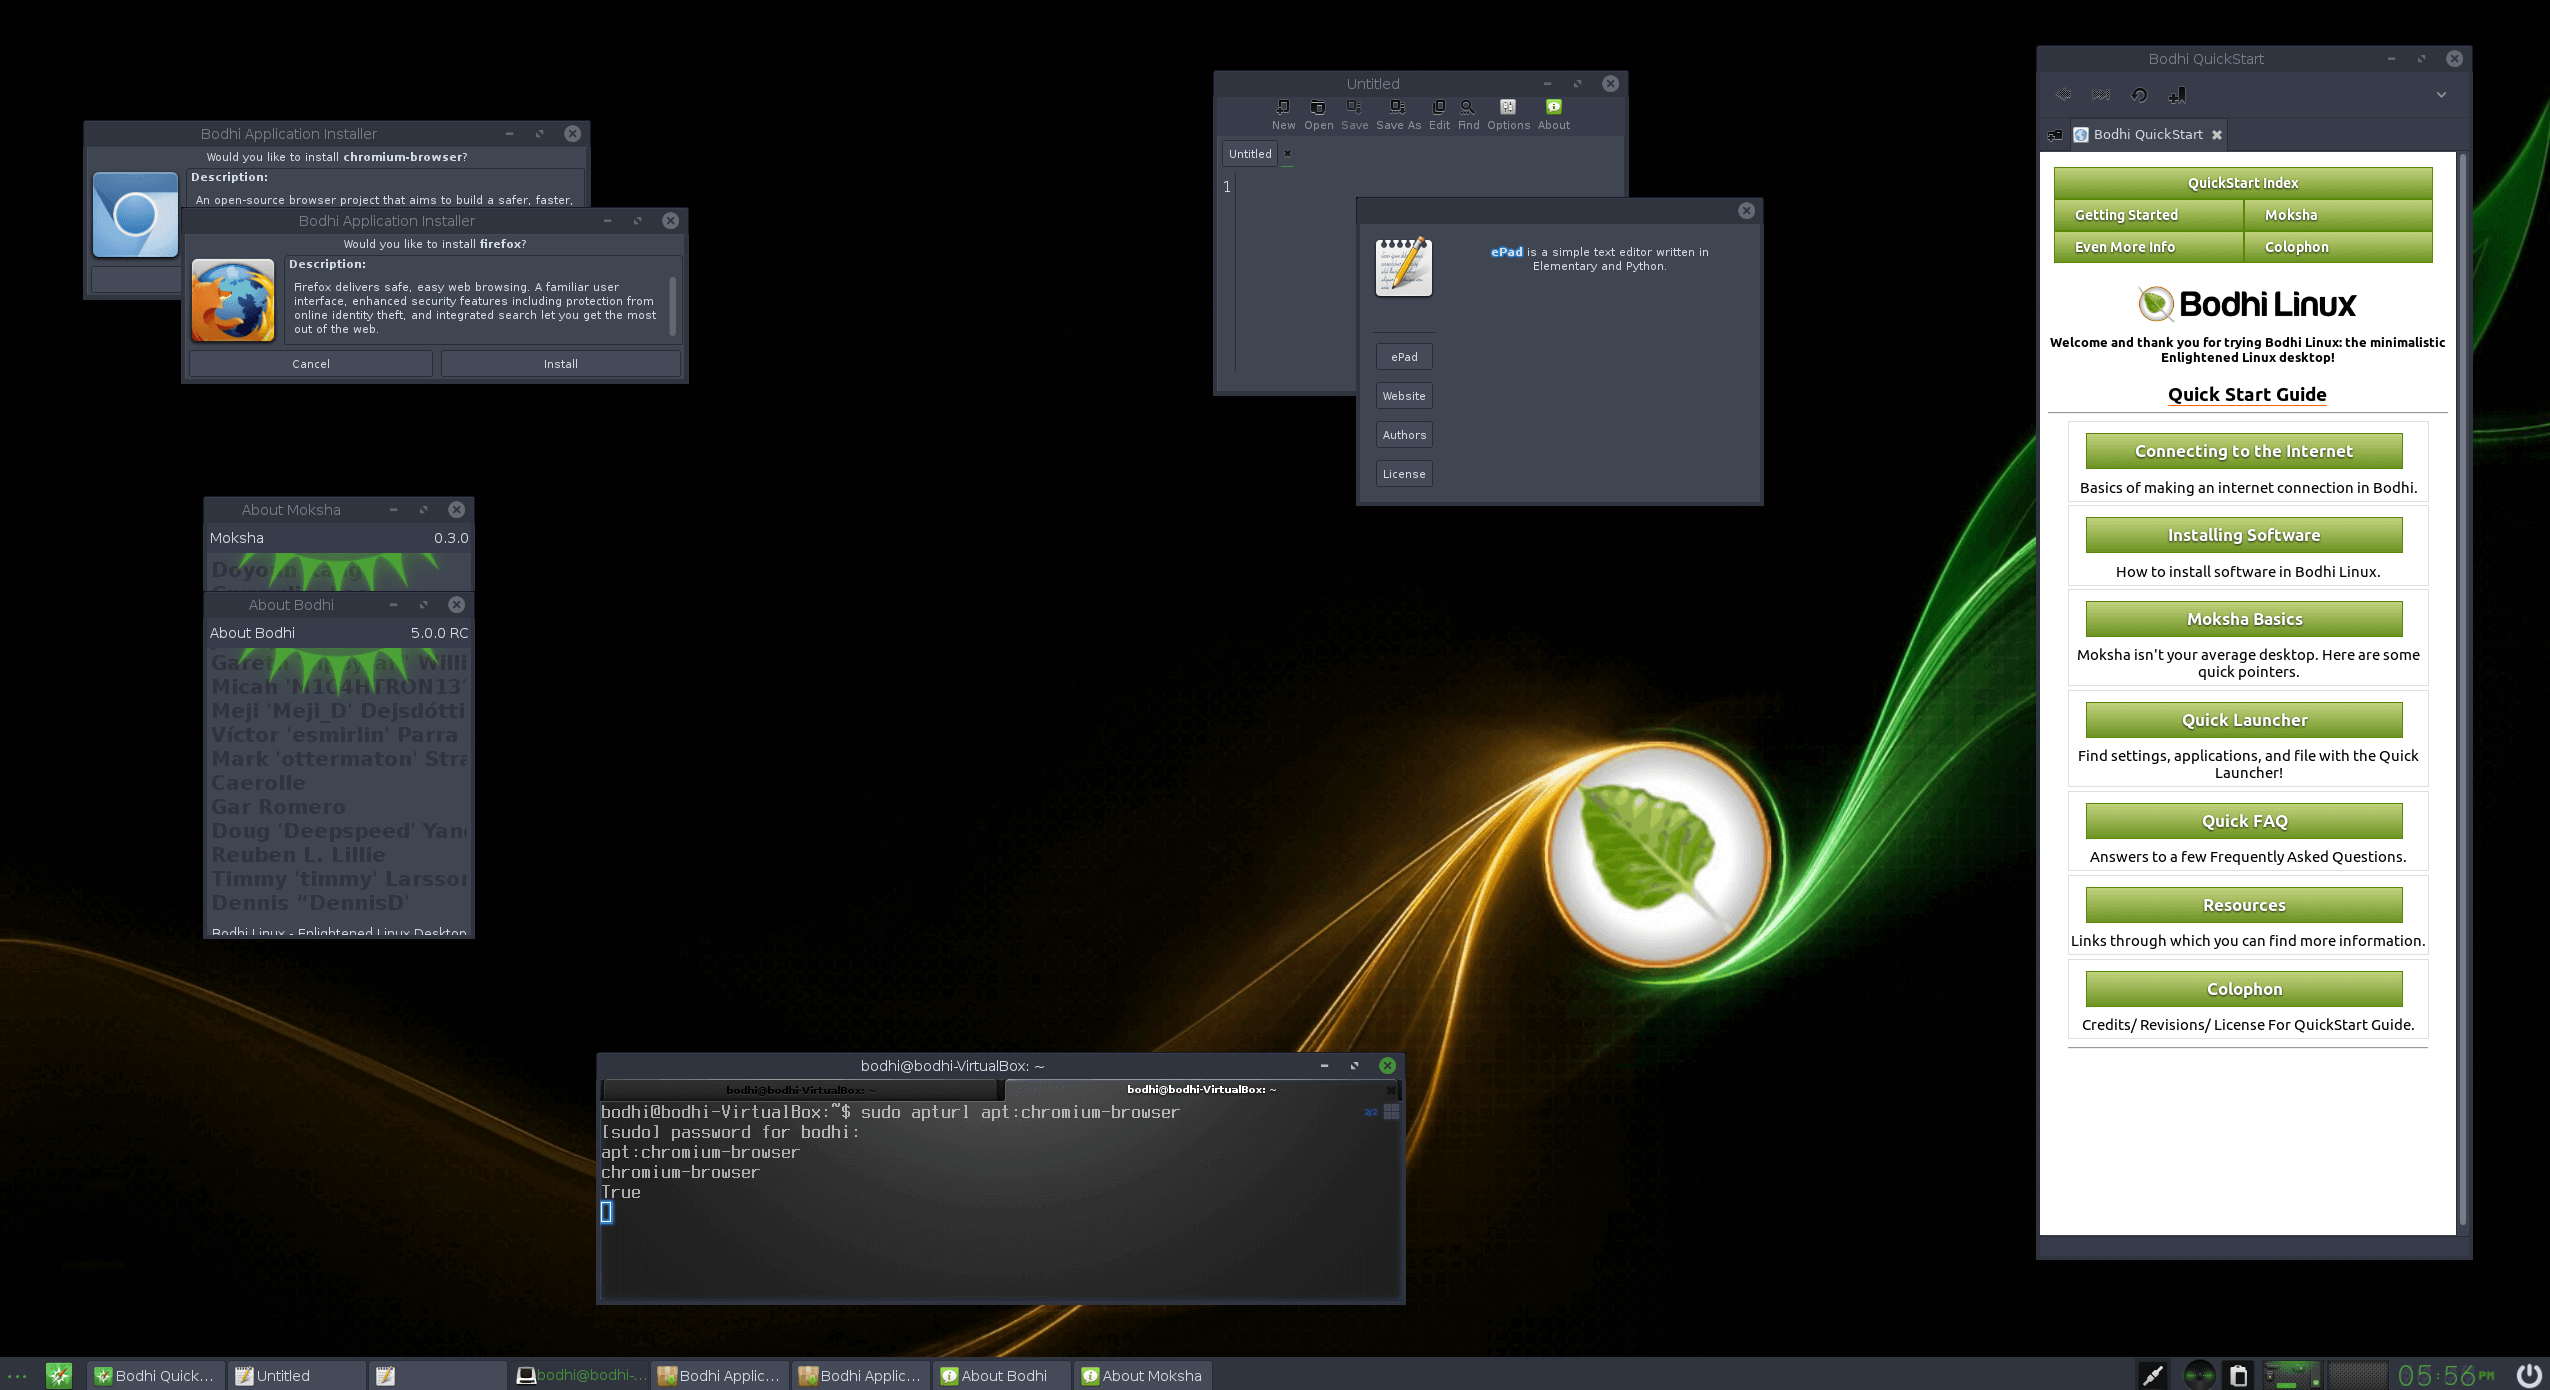 Bodhi Linux 5.0.0 Released - Bodhi Linux